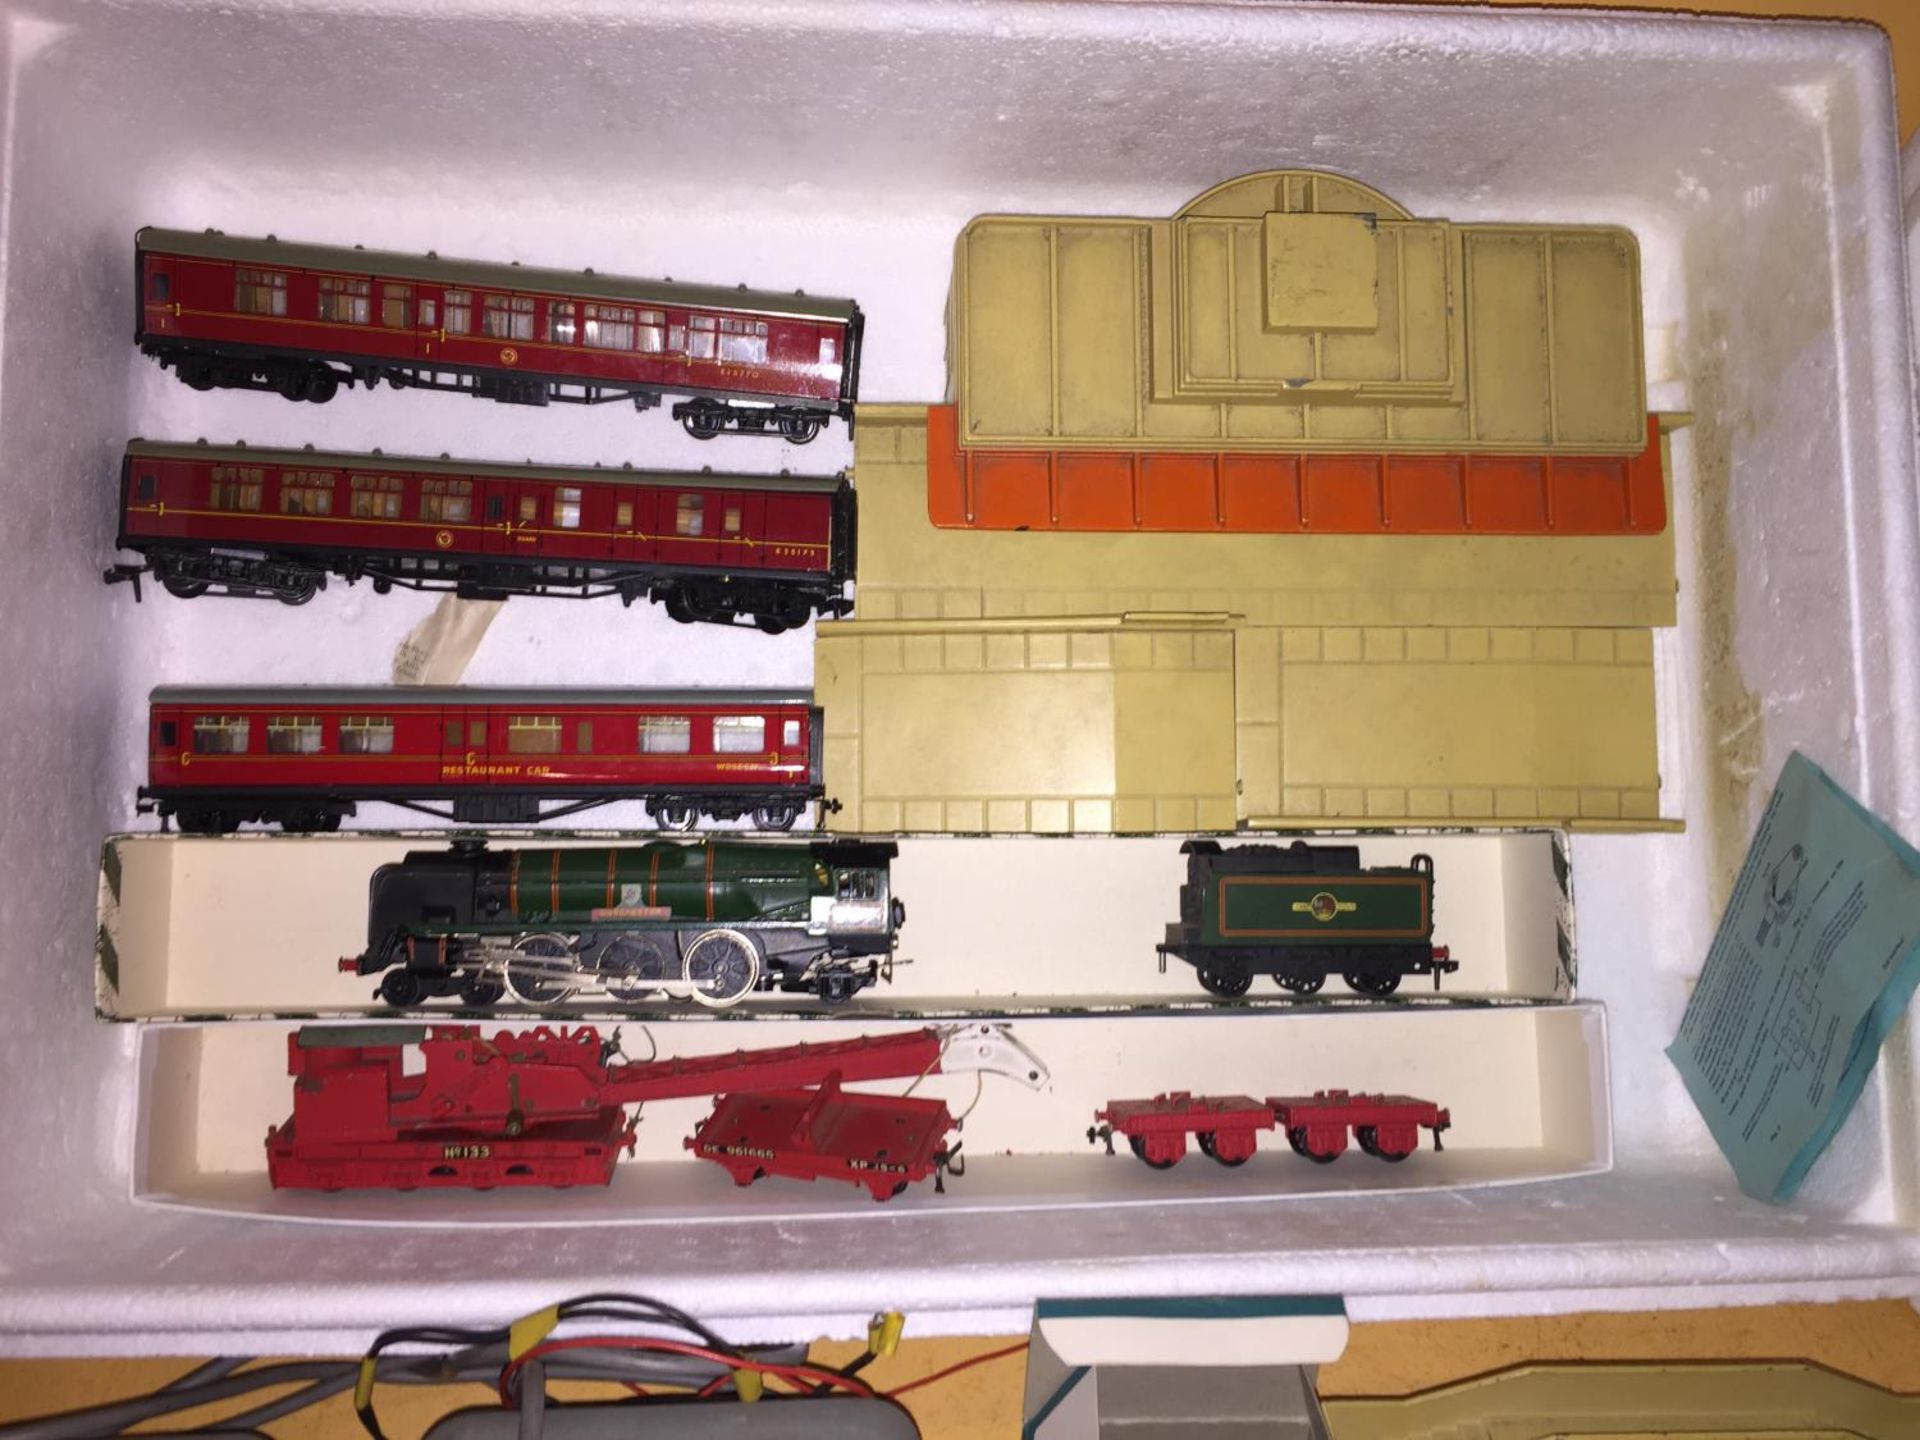 A VERY LARGE QUANTITY OF HORNBY MODEL RAILWAY ACCESSORIES - LEVEL CROSSING, SCENERY, BUFFERS, - Image 7 of 23